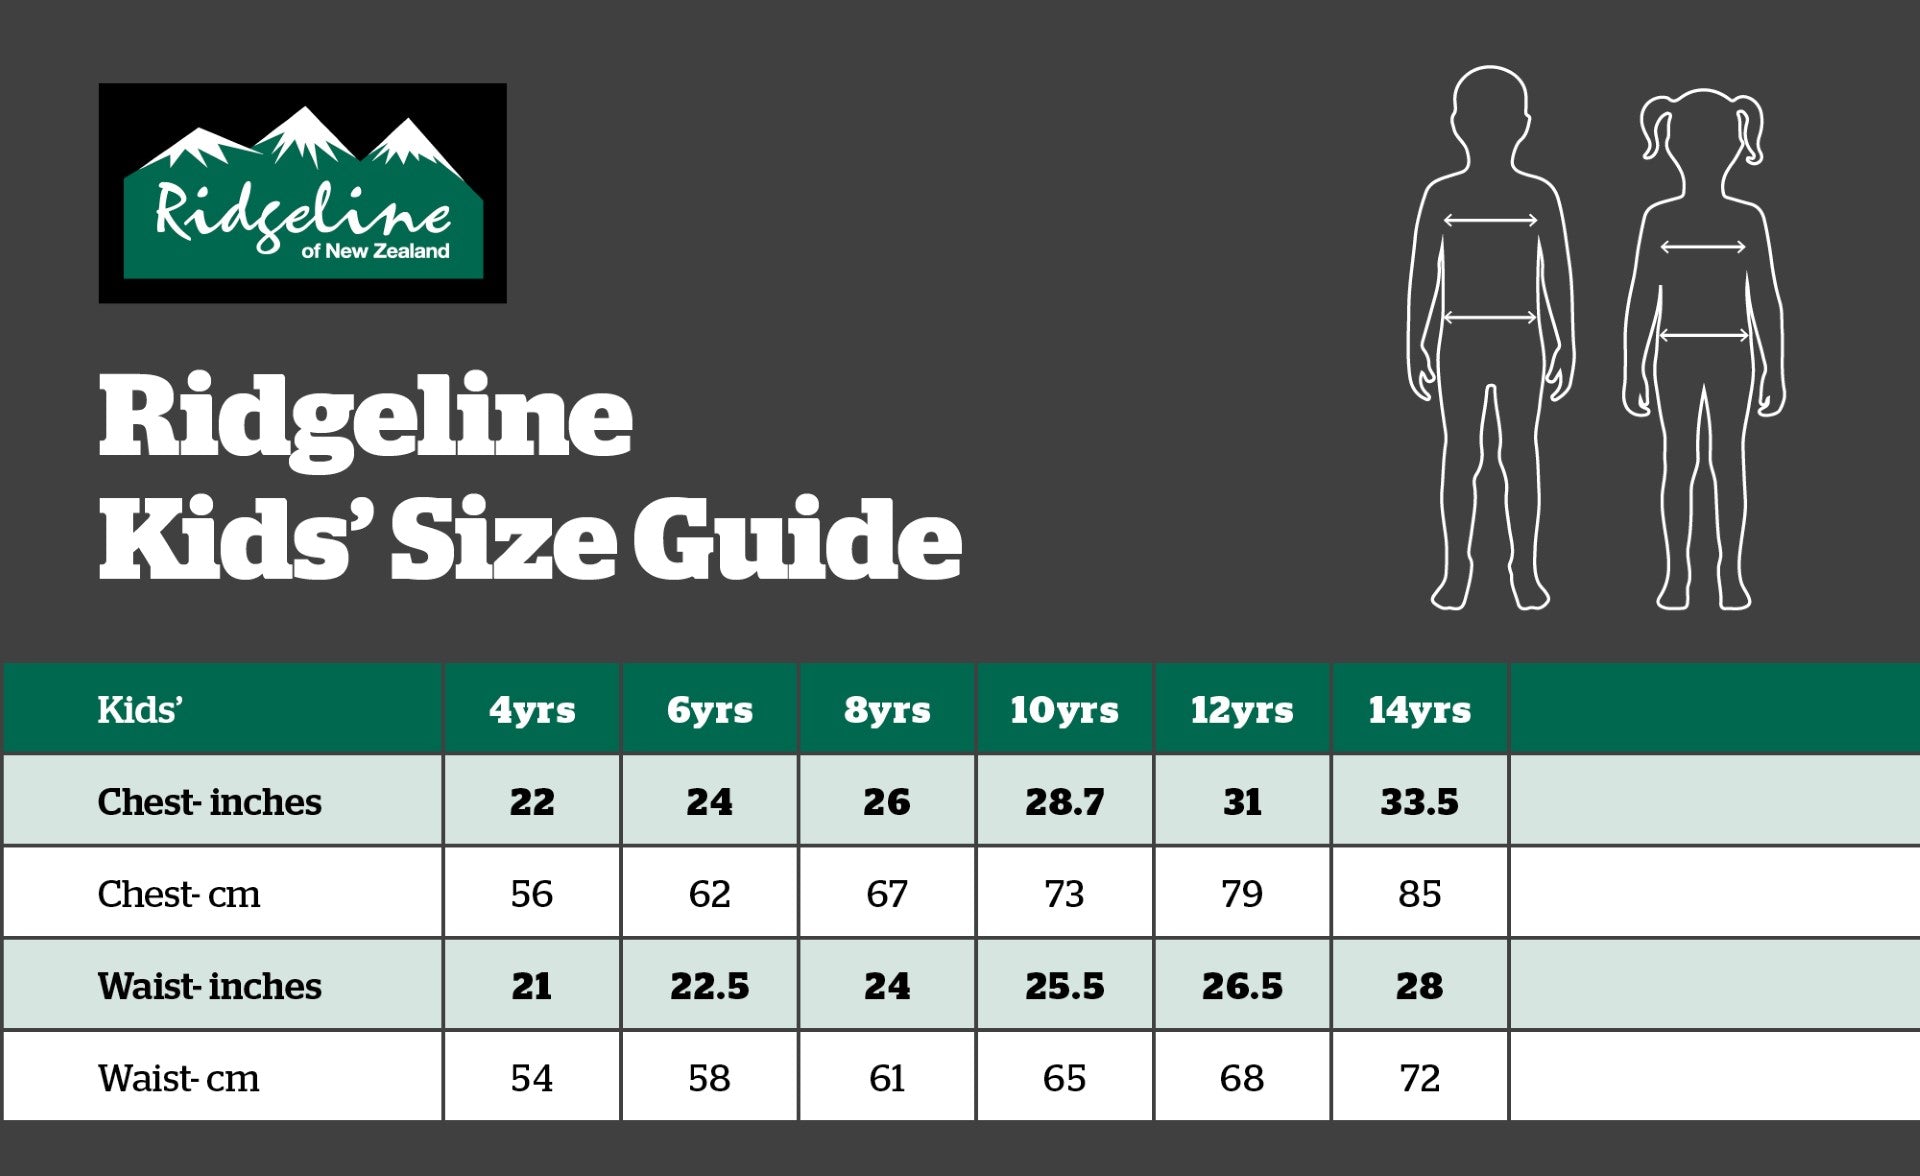 Kids' Size Guide